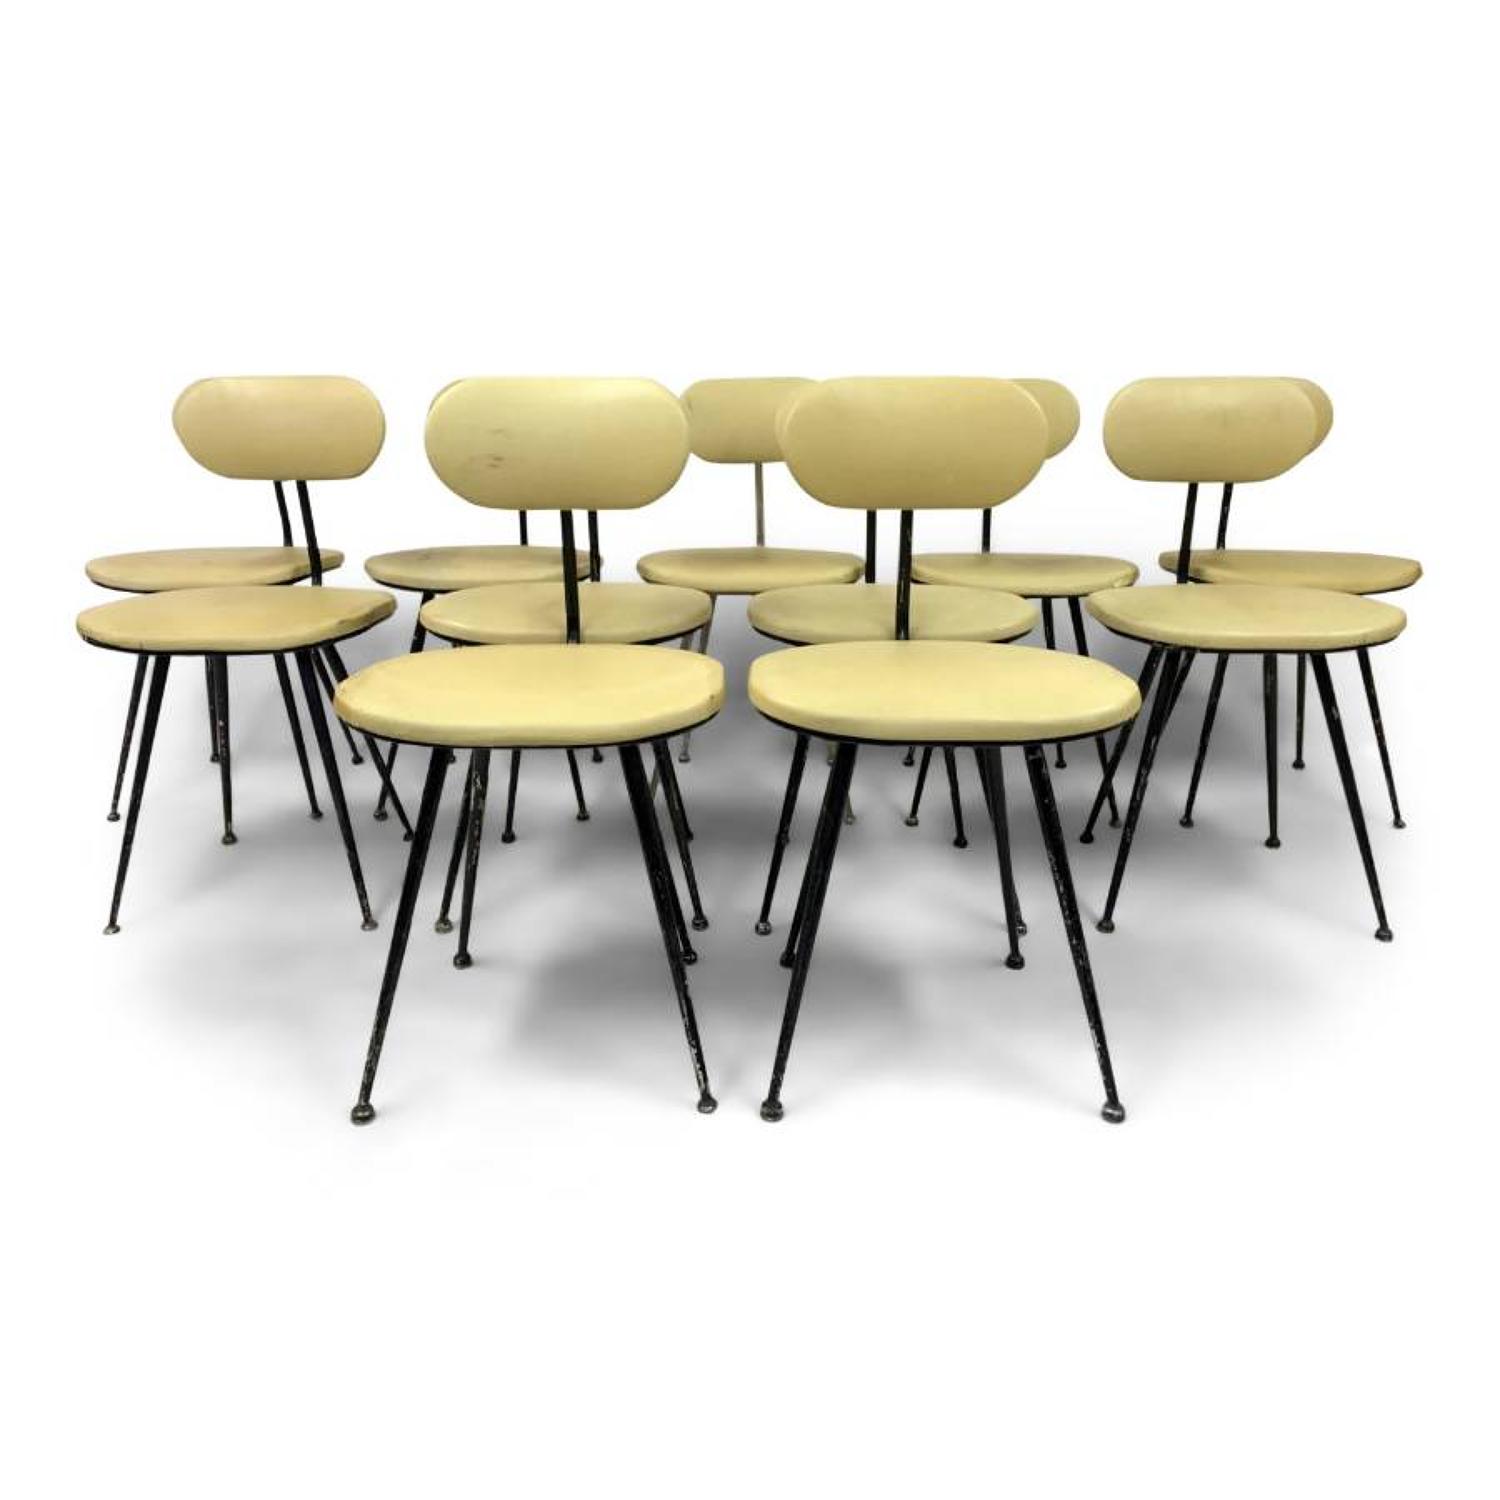 A set of eleven industrial dining chairs